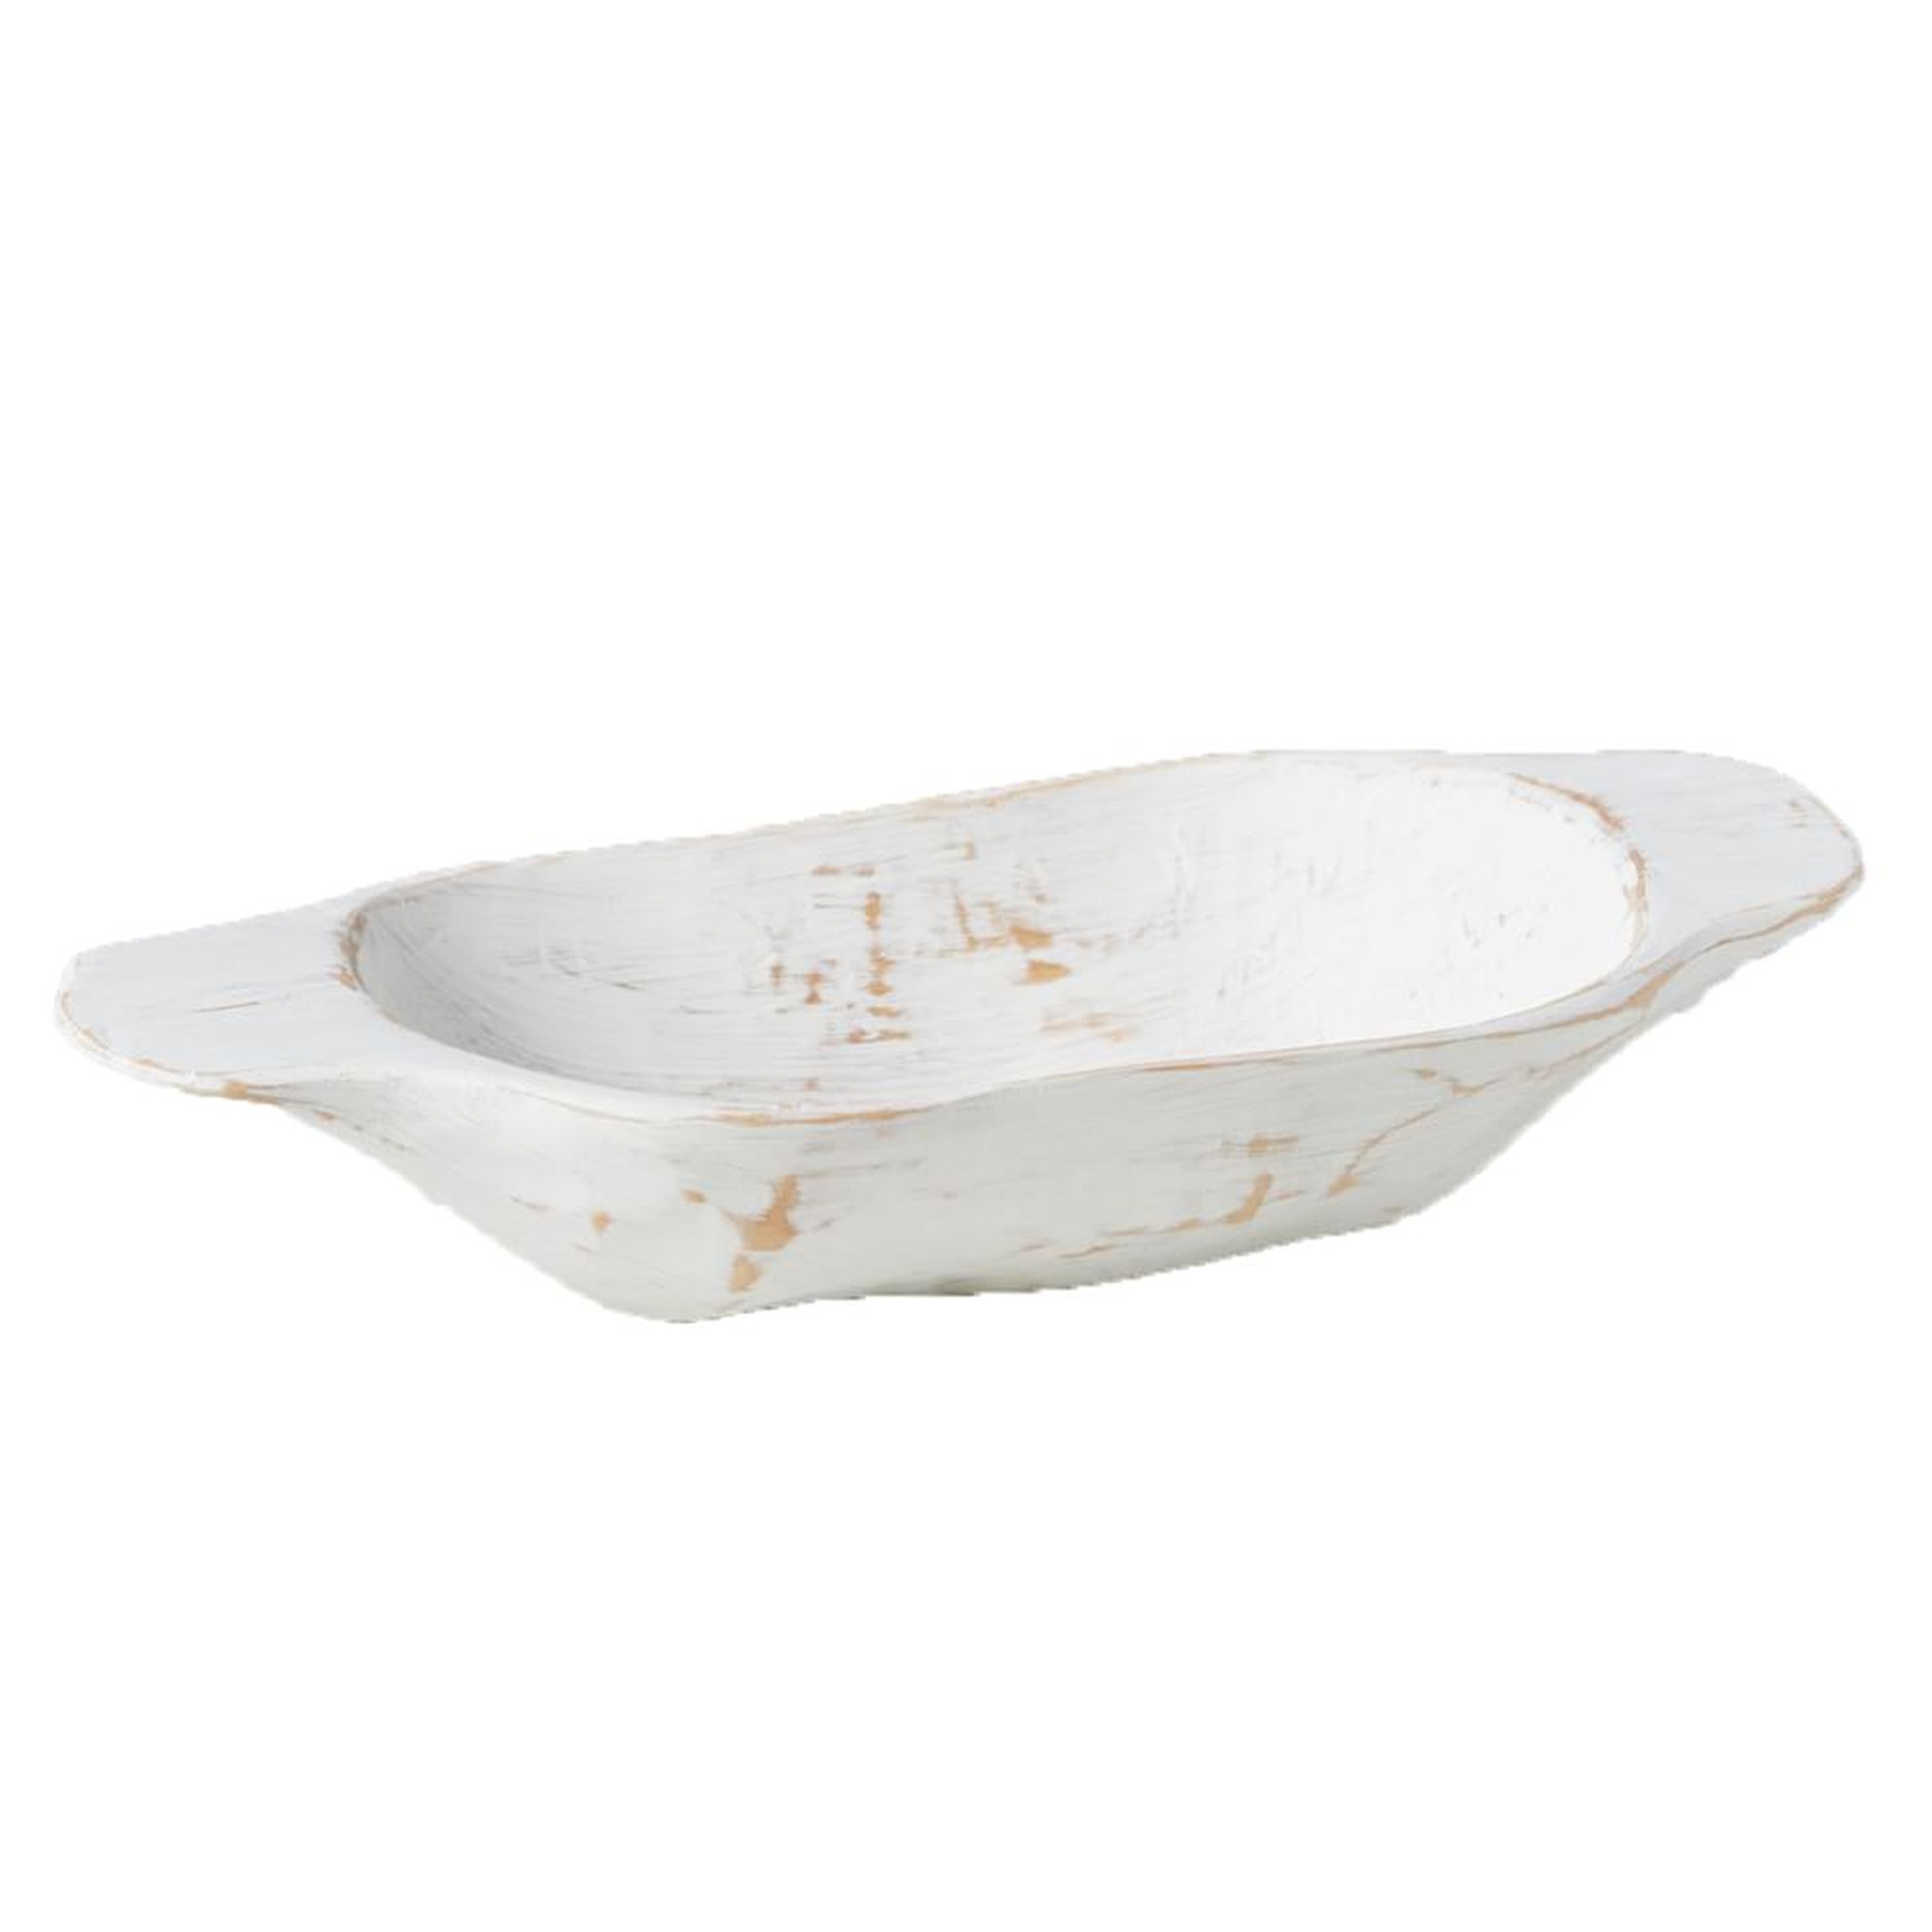 Distressed Dough Bowl, Small, White - West Elm